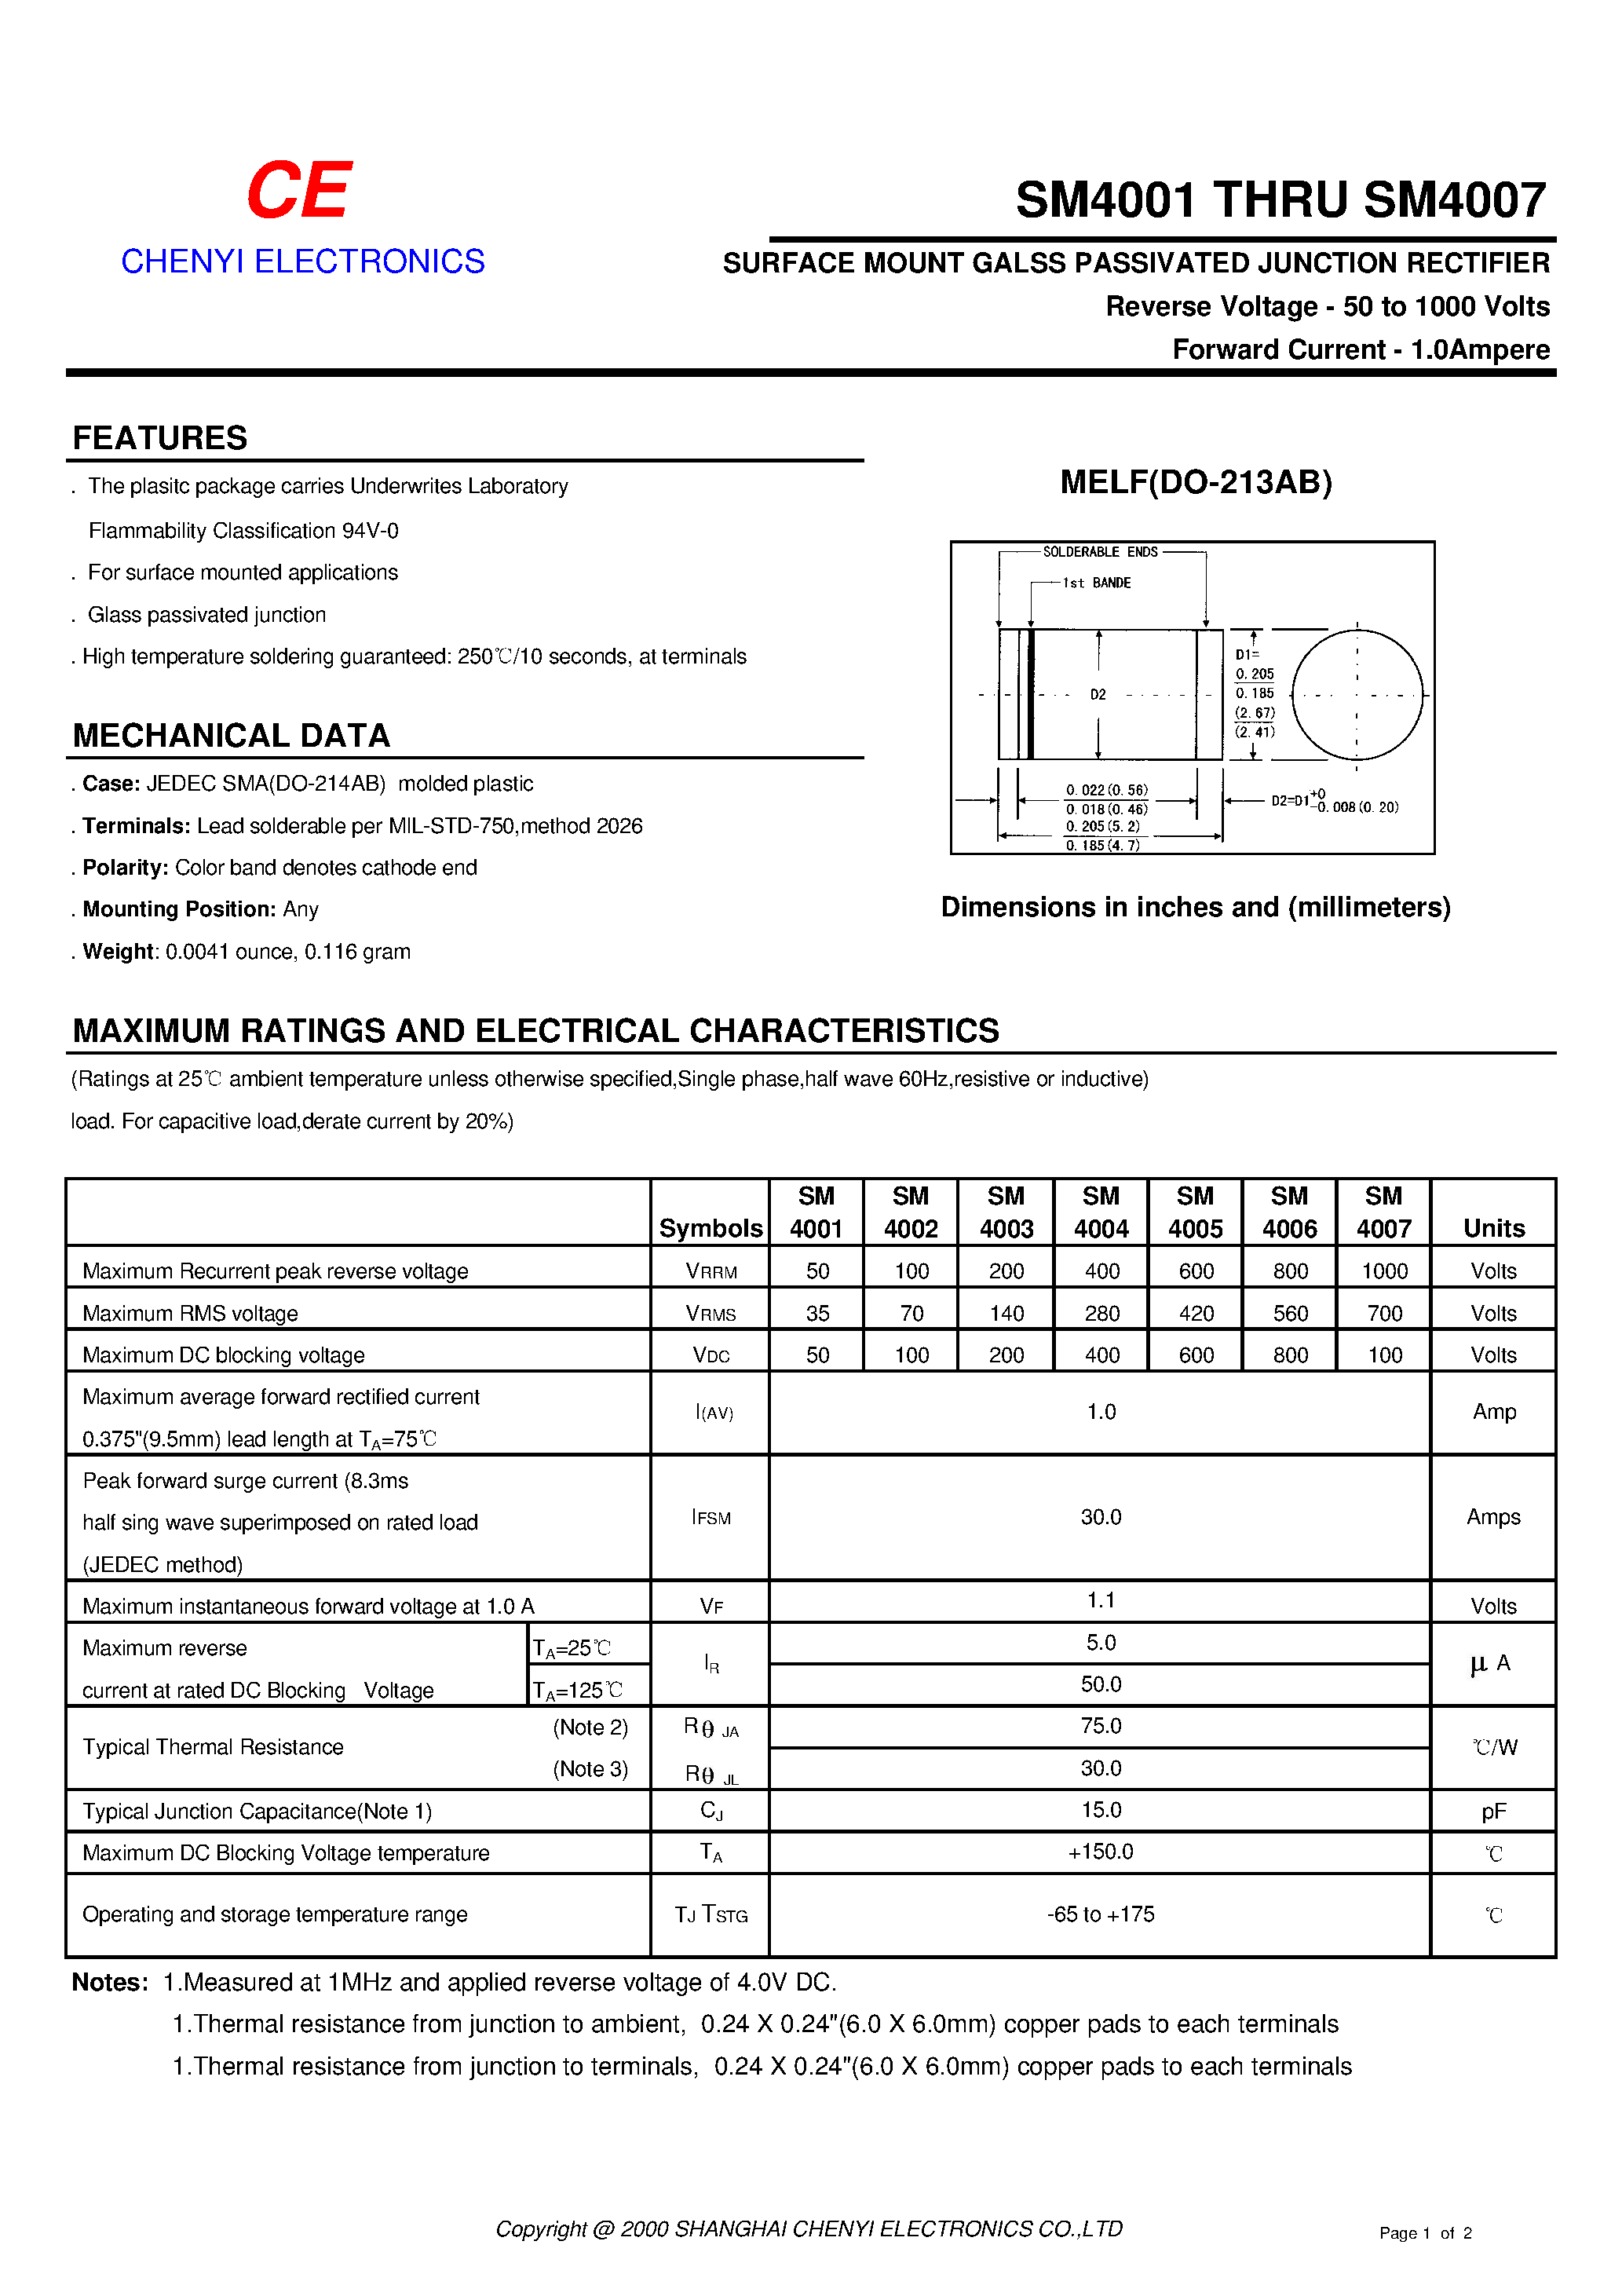 Даташит SM4004 - SURFACE MOUNT GALSS PASSIVATED JUNCTION RECTIFIER страница 1